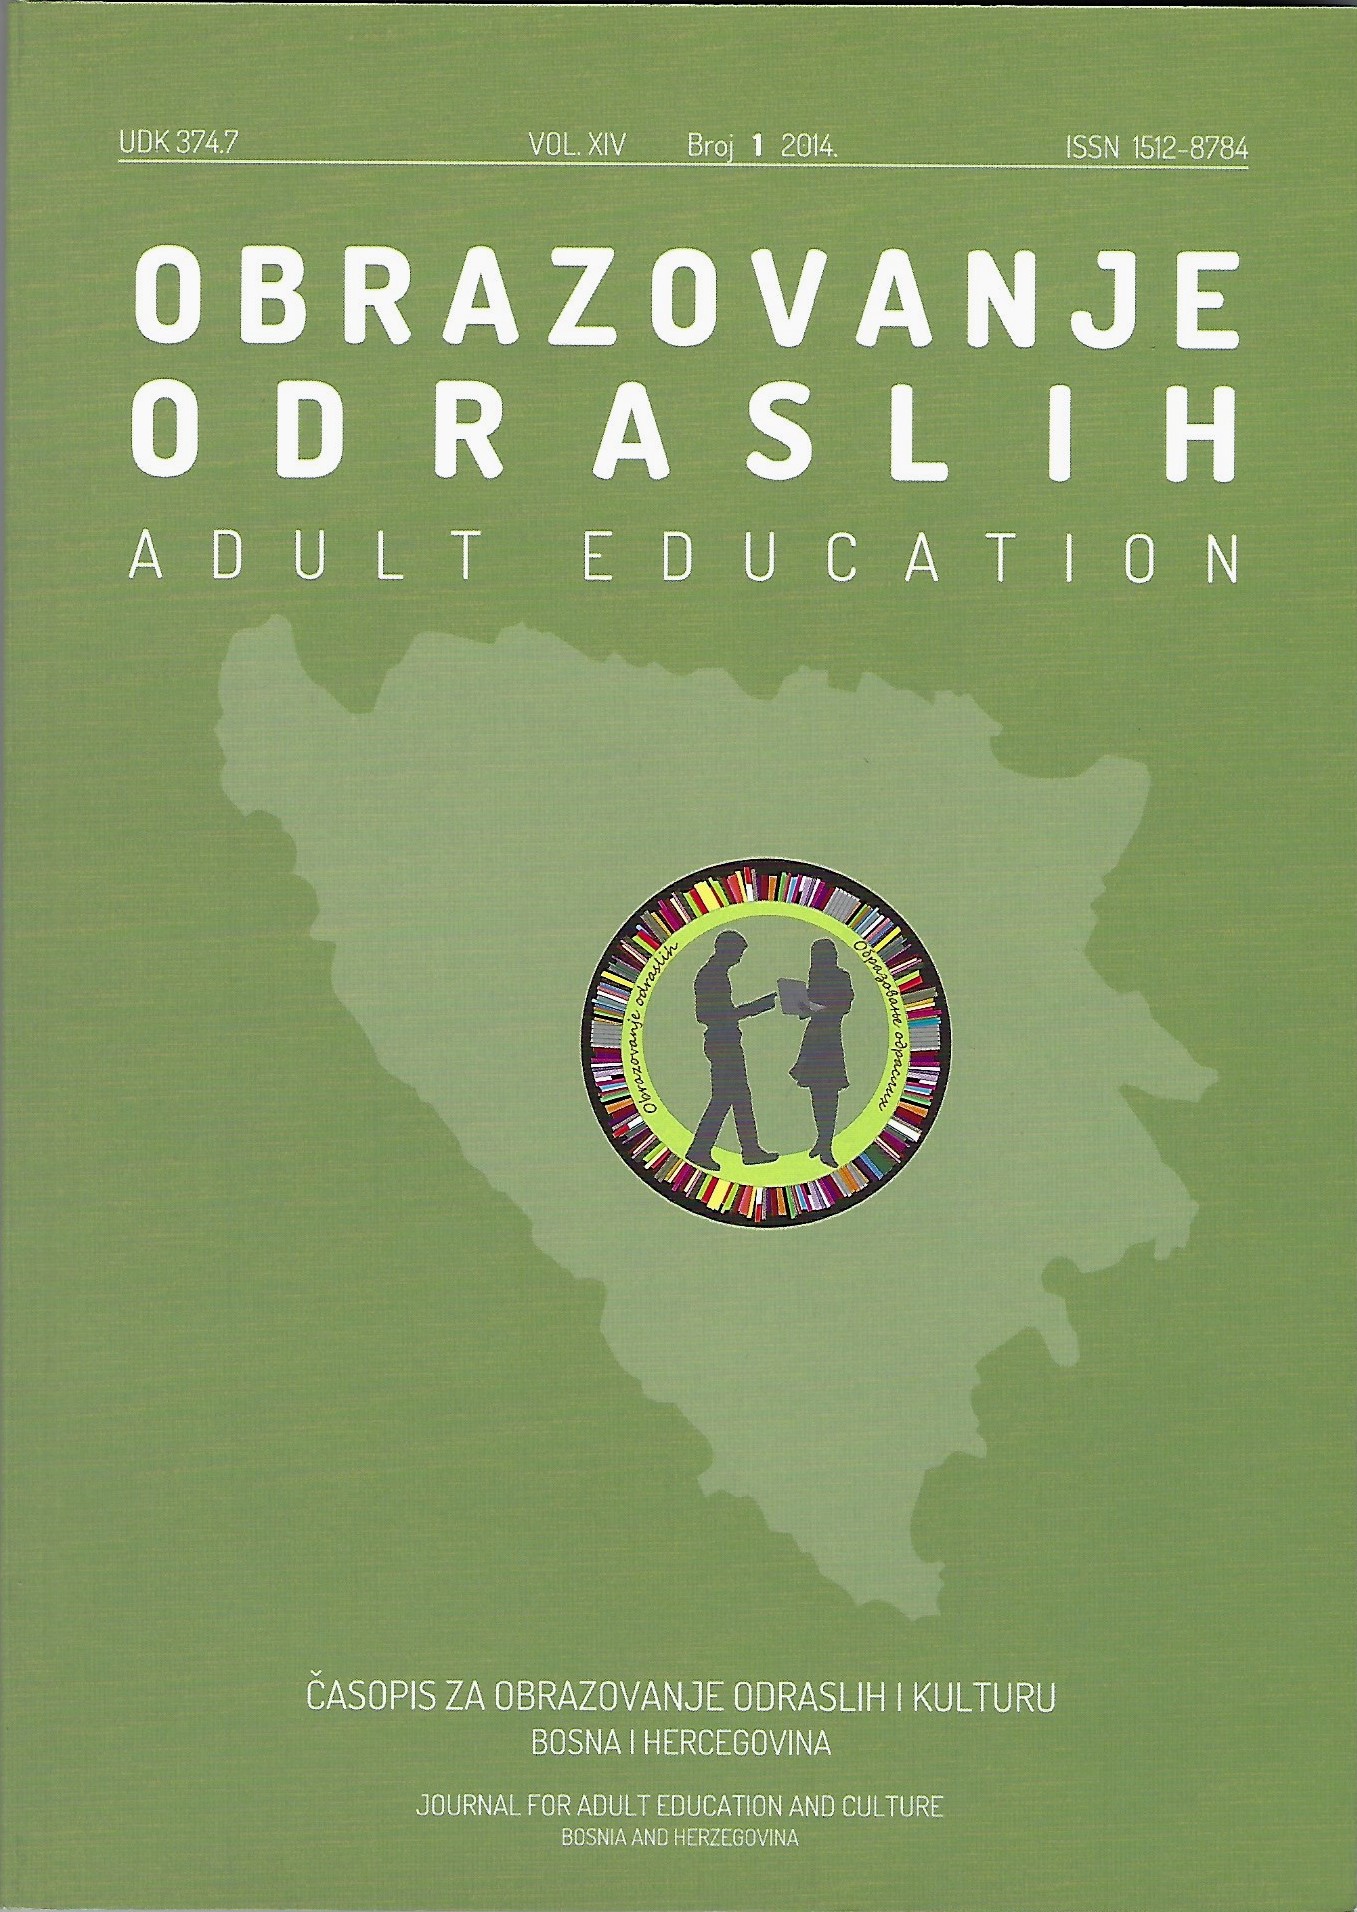 Possibilities of Bosnia and Herzegovina online media in information and education about Euro-Atlantic integration Cover Image